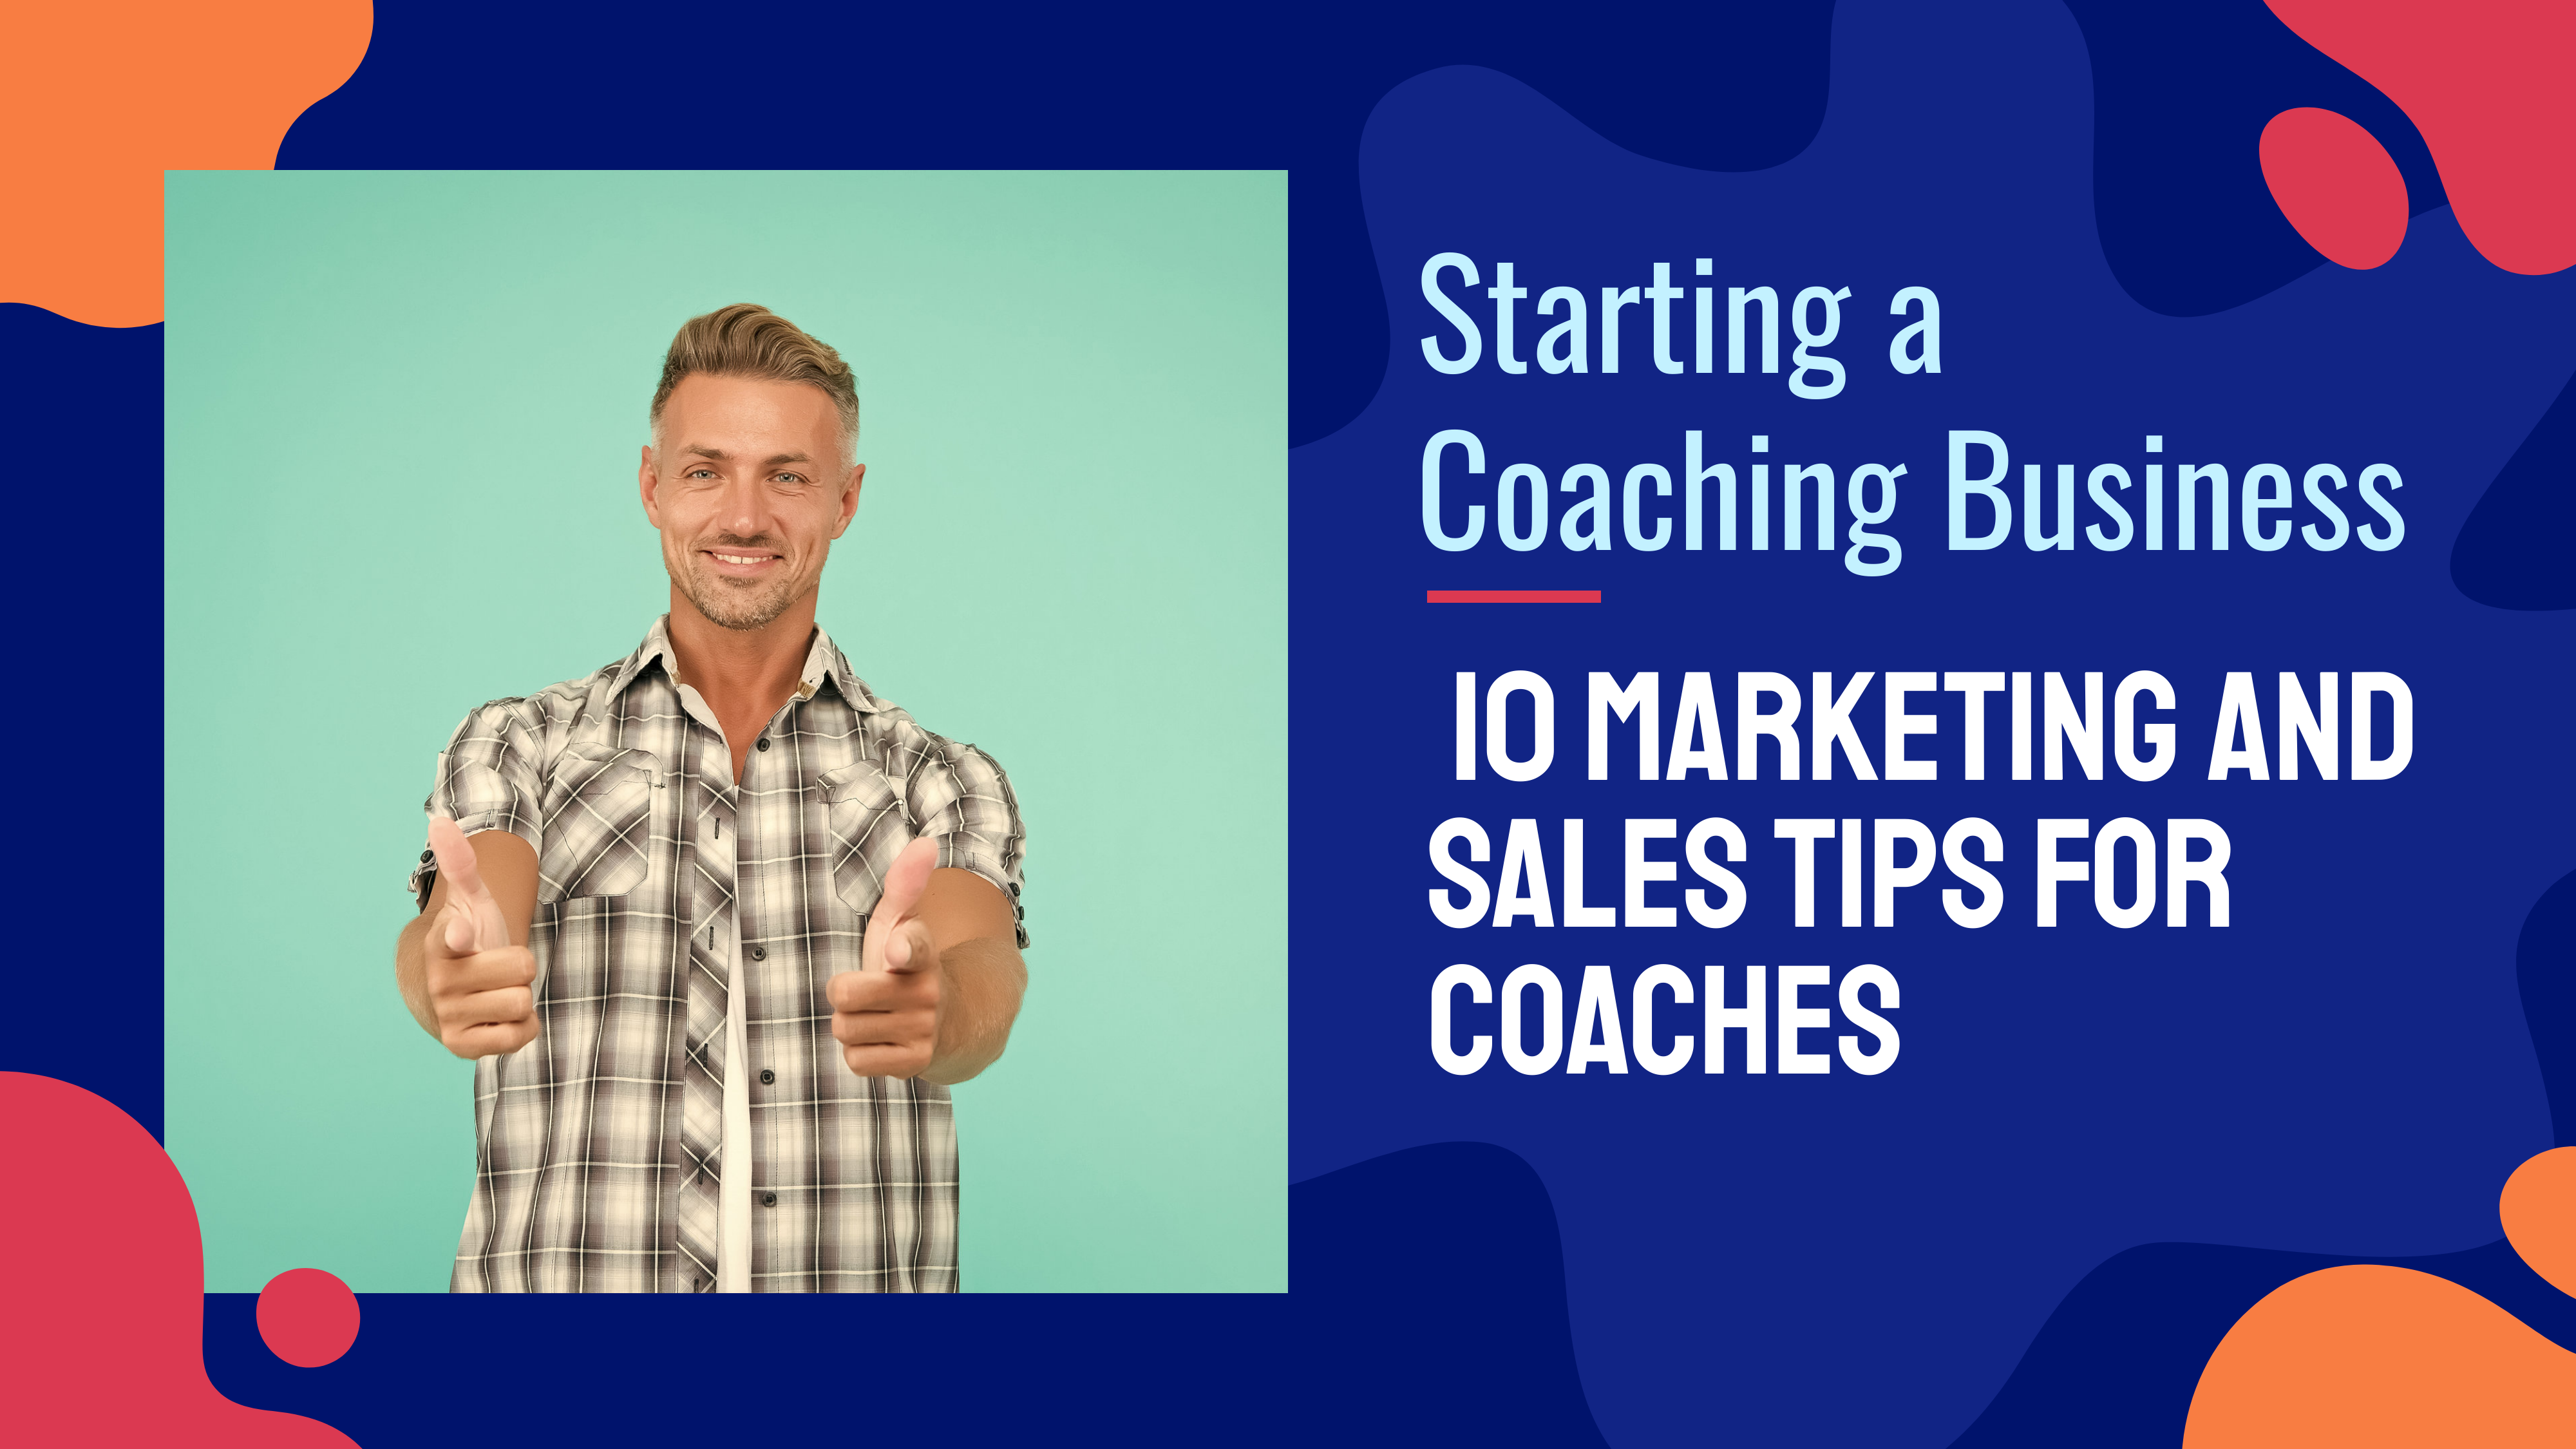 Starting a Coaching Business: 10 Marketing and Sales Tips for Coaches